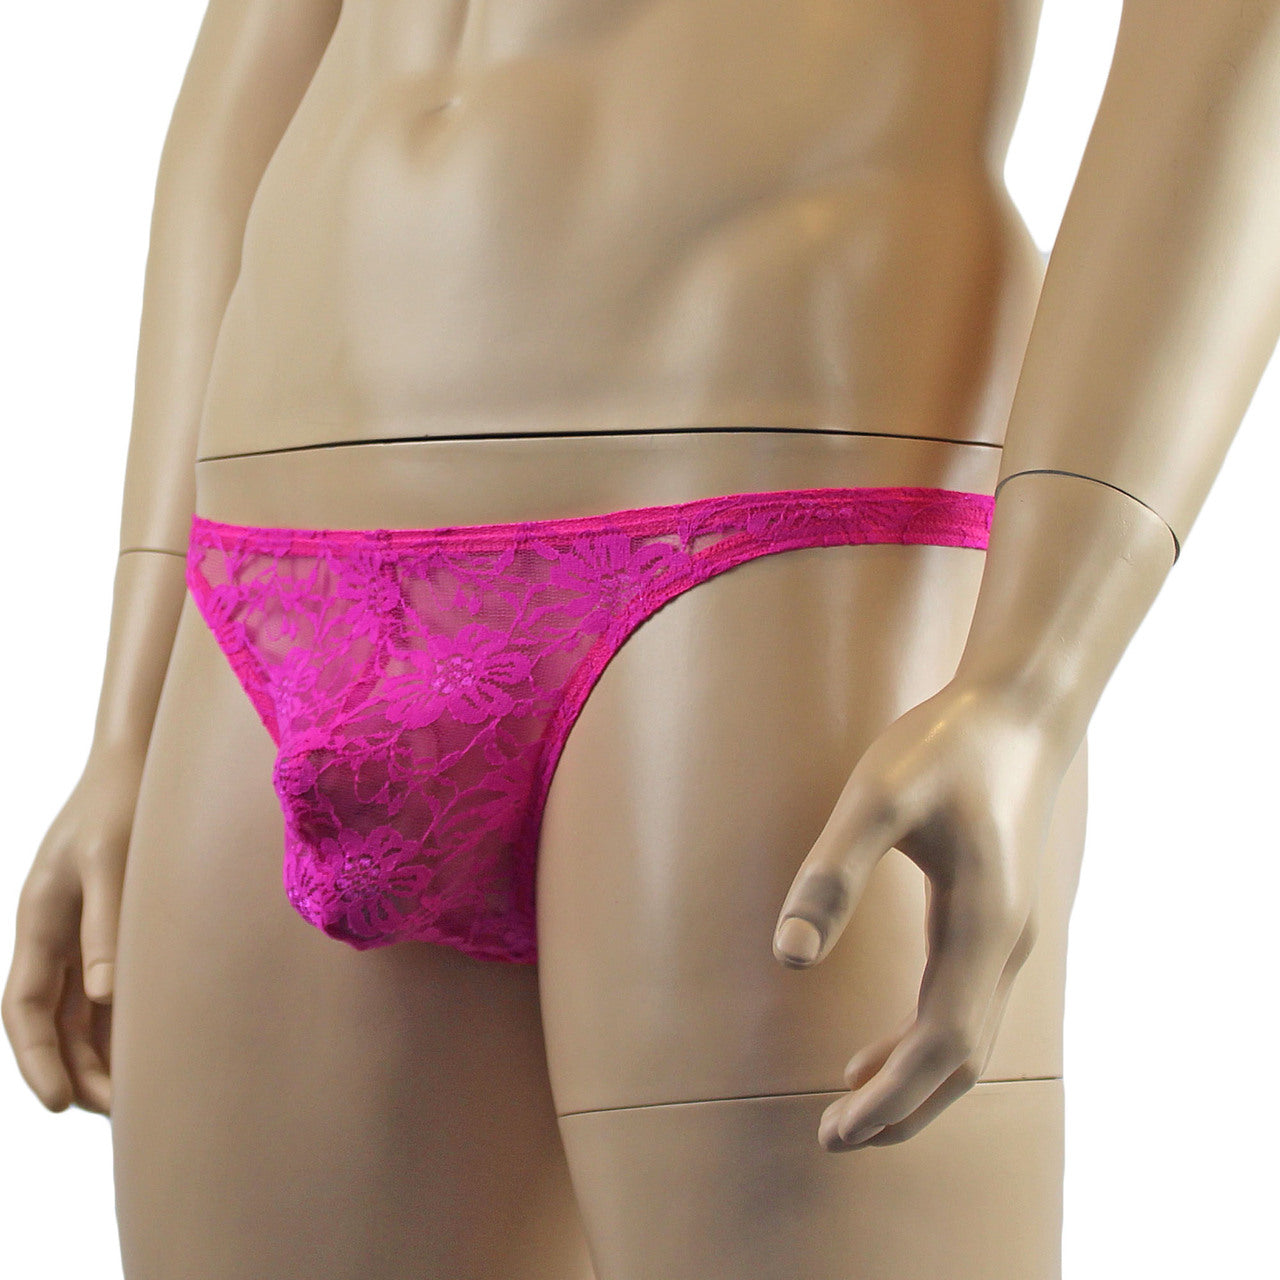 LAST ORDERS - Mens Sexy Lingerie Lace Thong G string Neon Pink